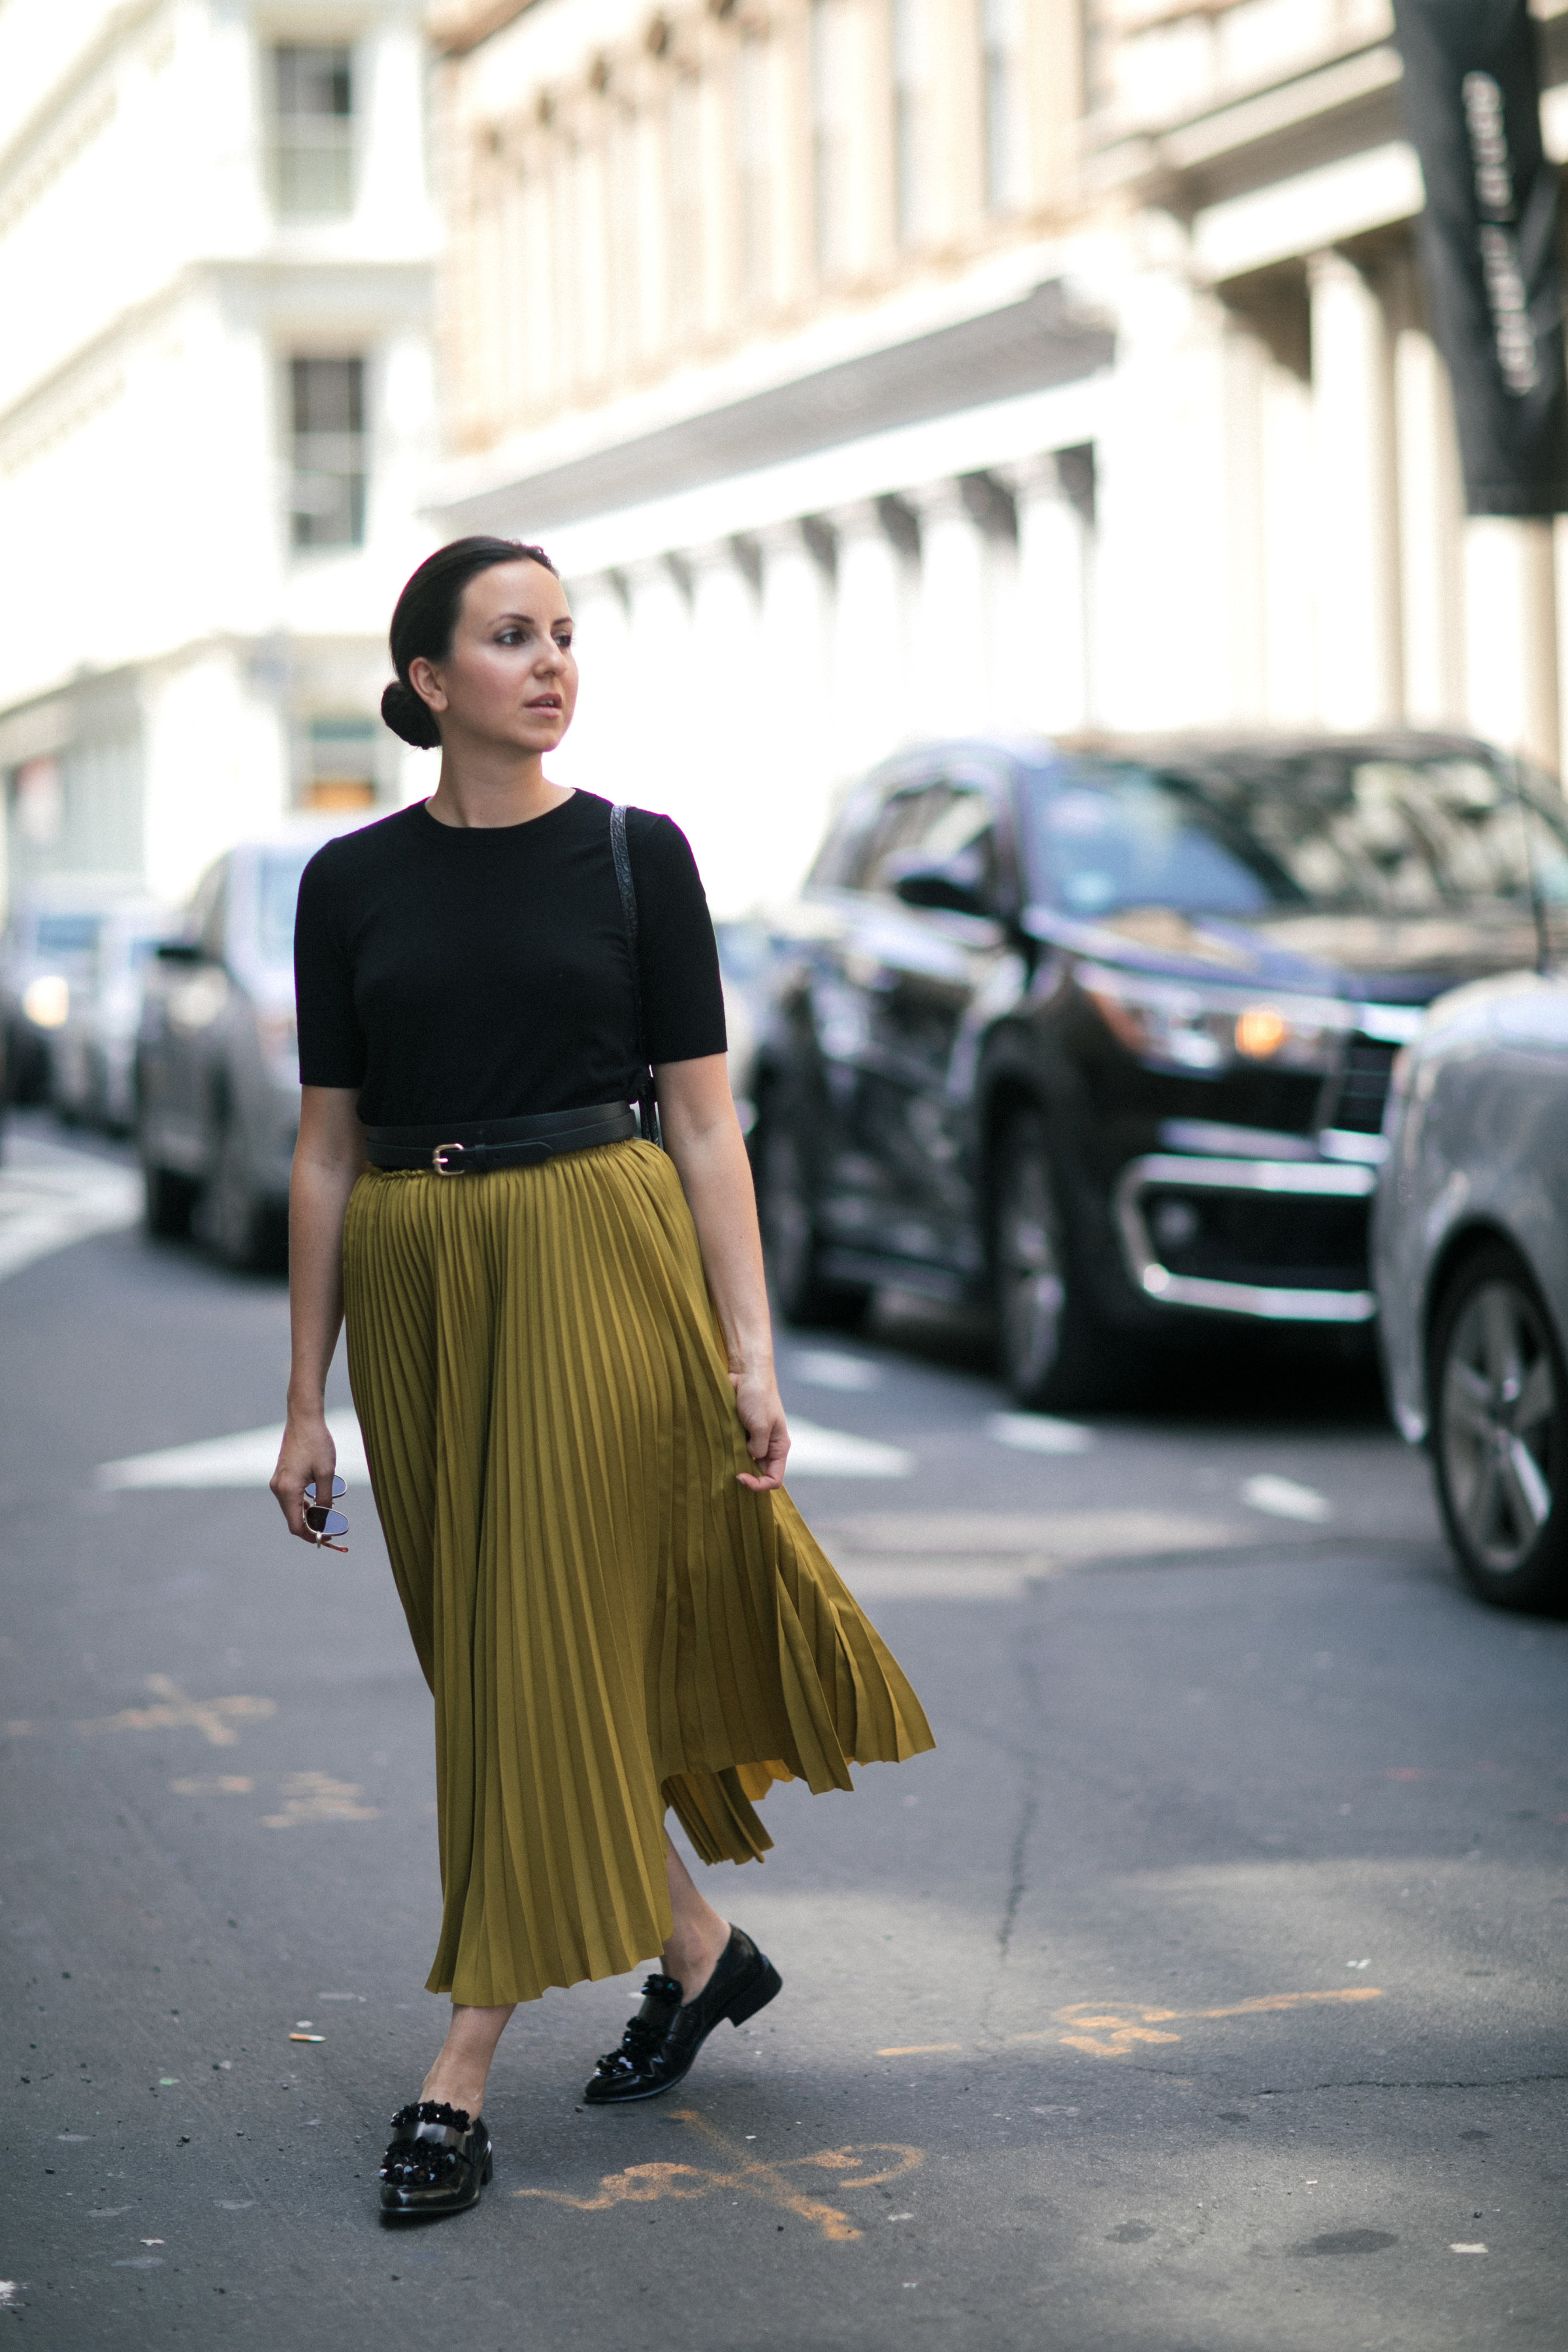 Yana Frigelis of NoMad Luxuries wearing a midi skirt from Zara for a fall trend and loafers for a casual look in new york